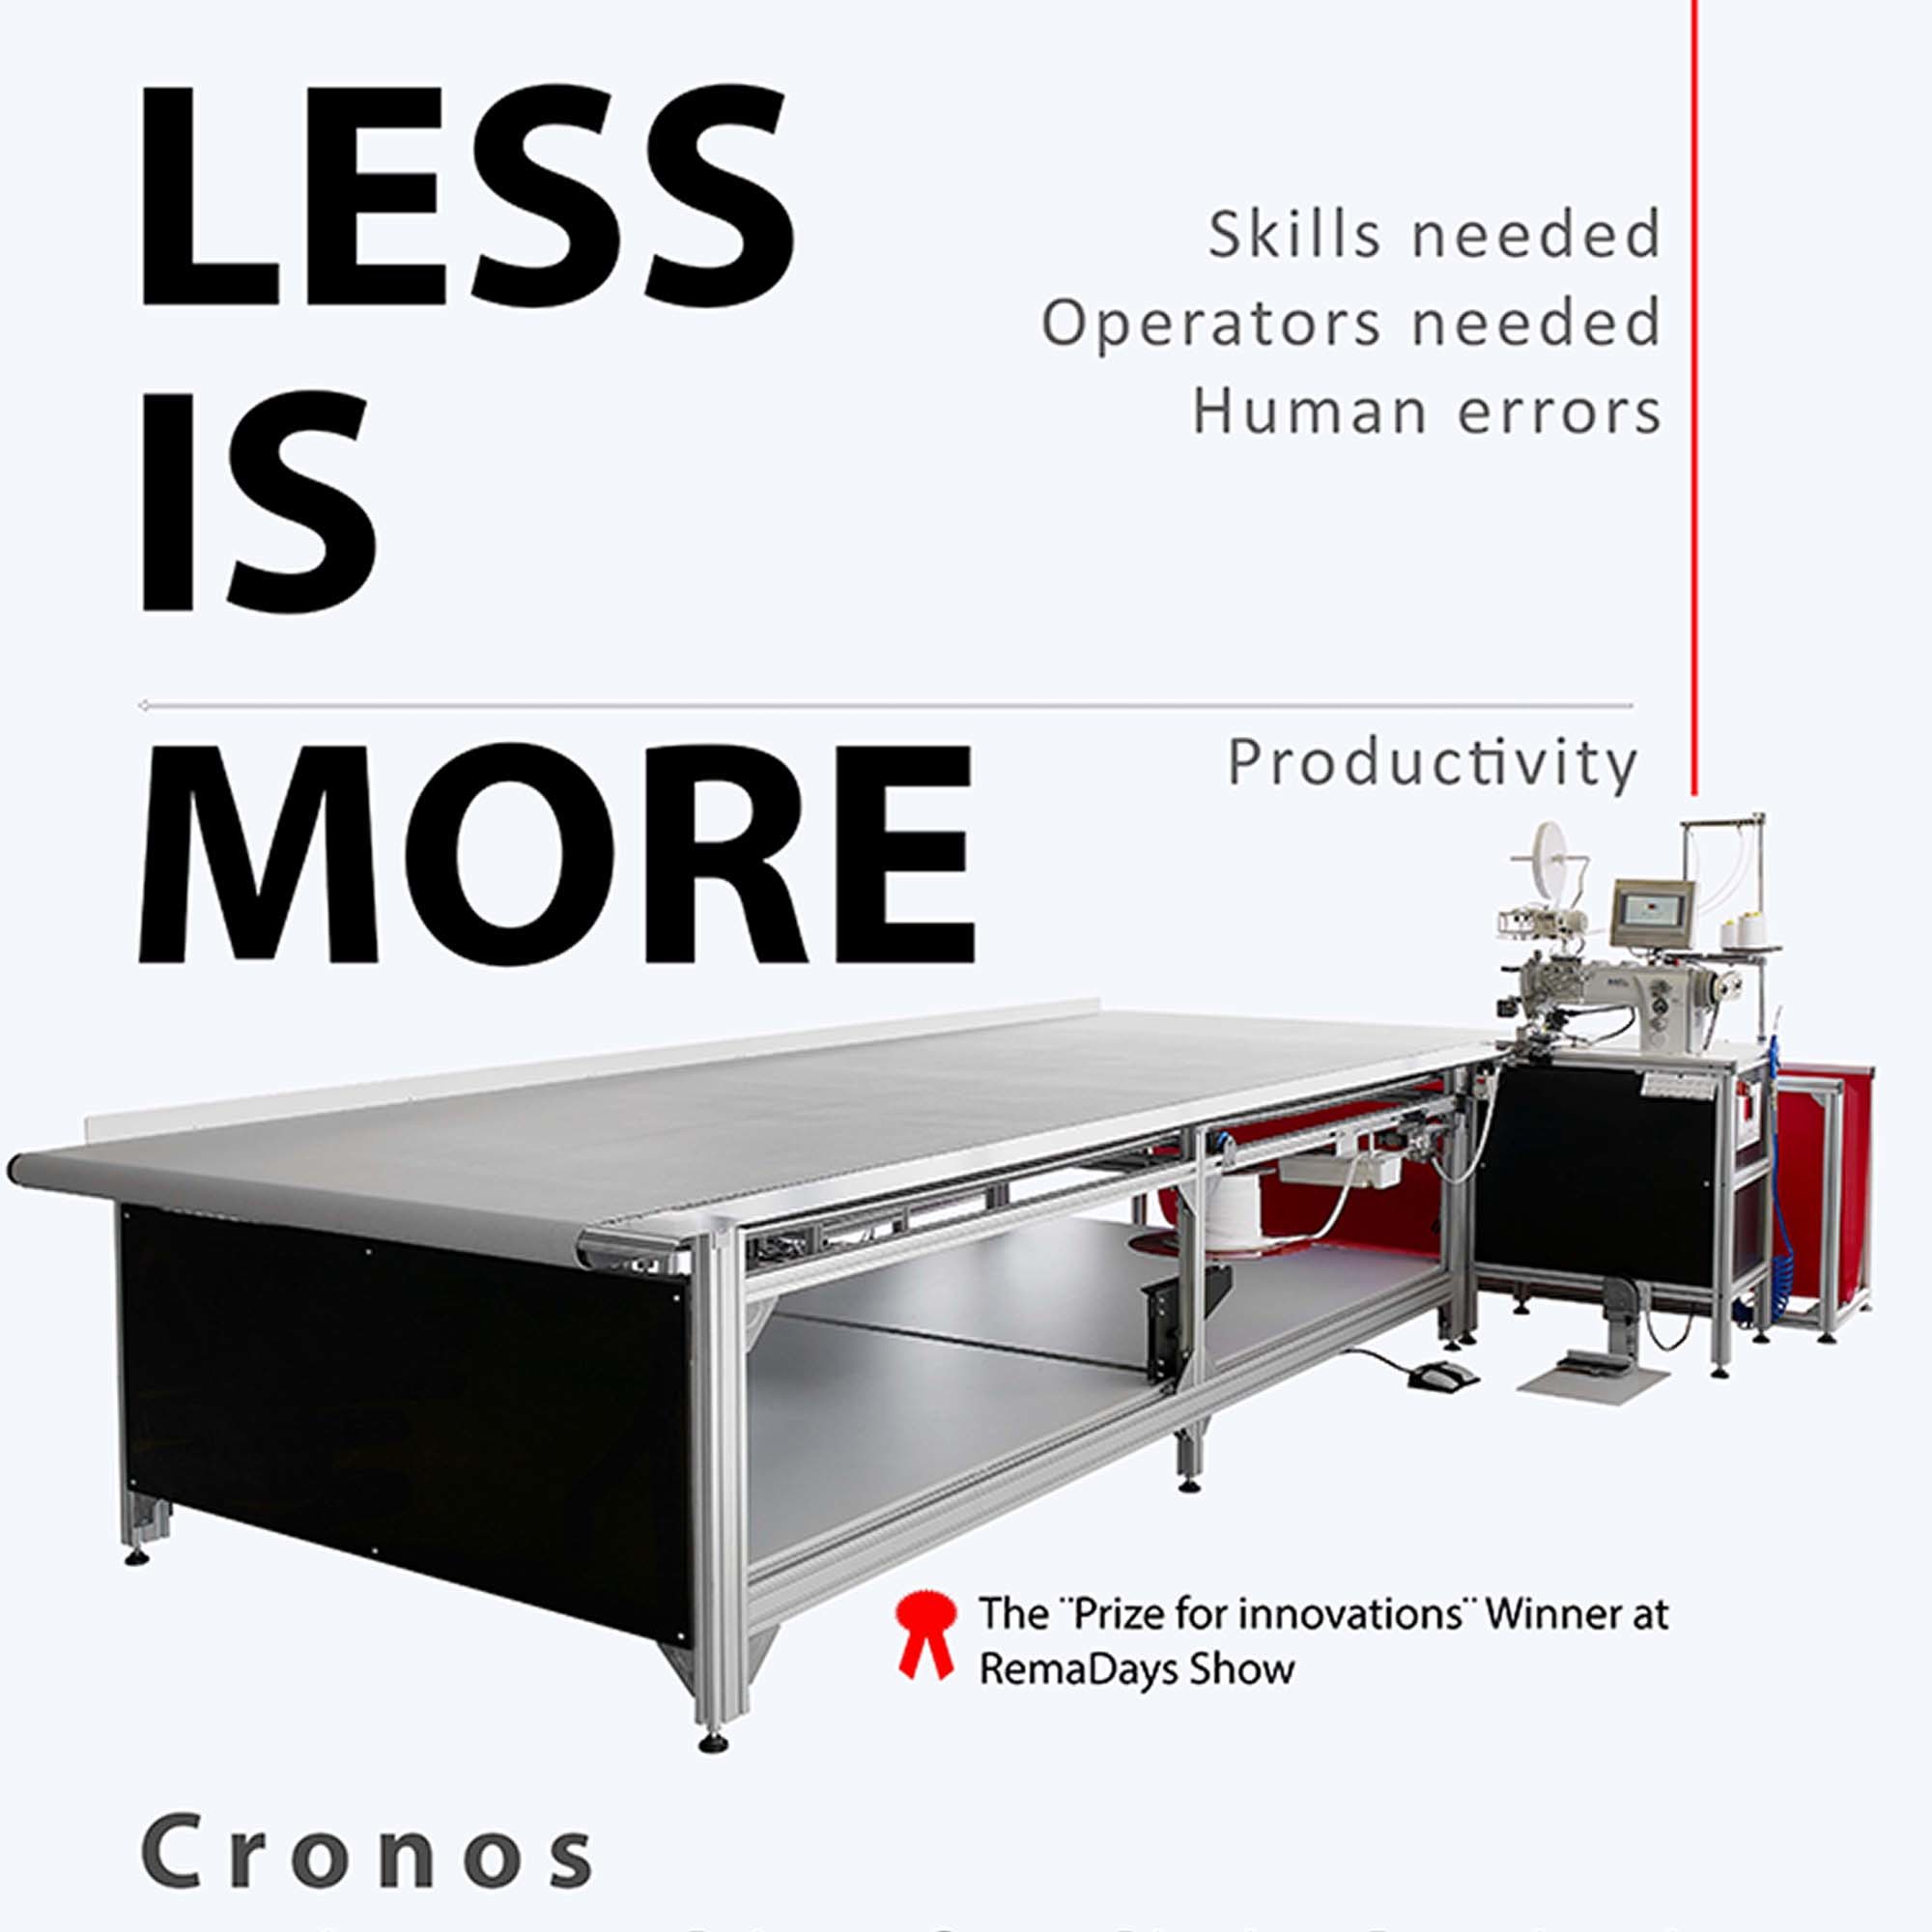 LESS IS MORE (4) – LESS skills needed, LESS operators needed, LESS errors, MORE productivity